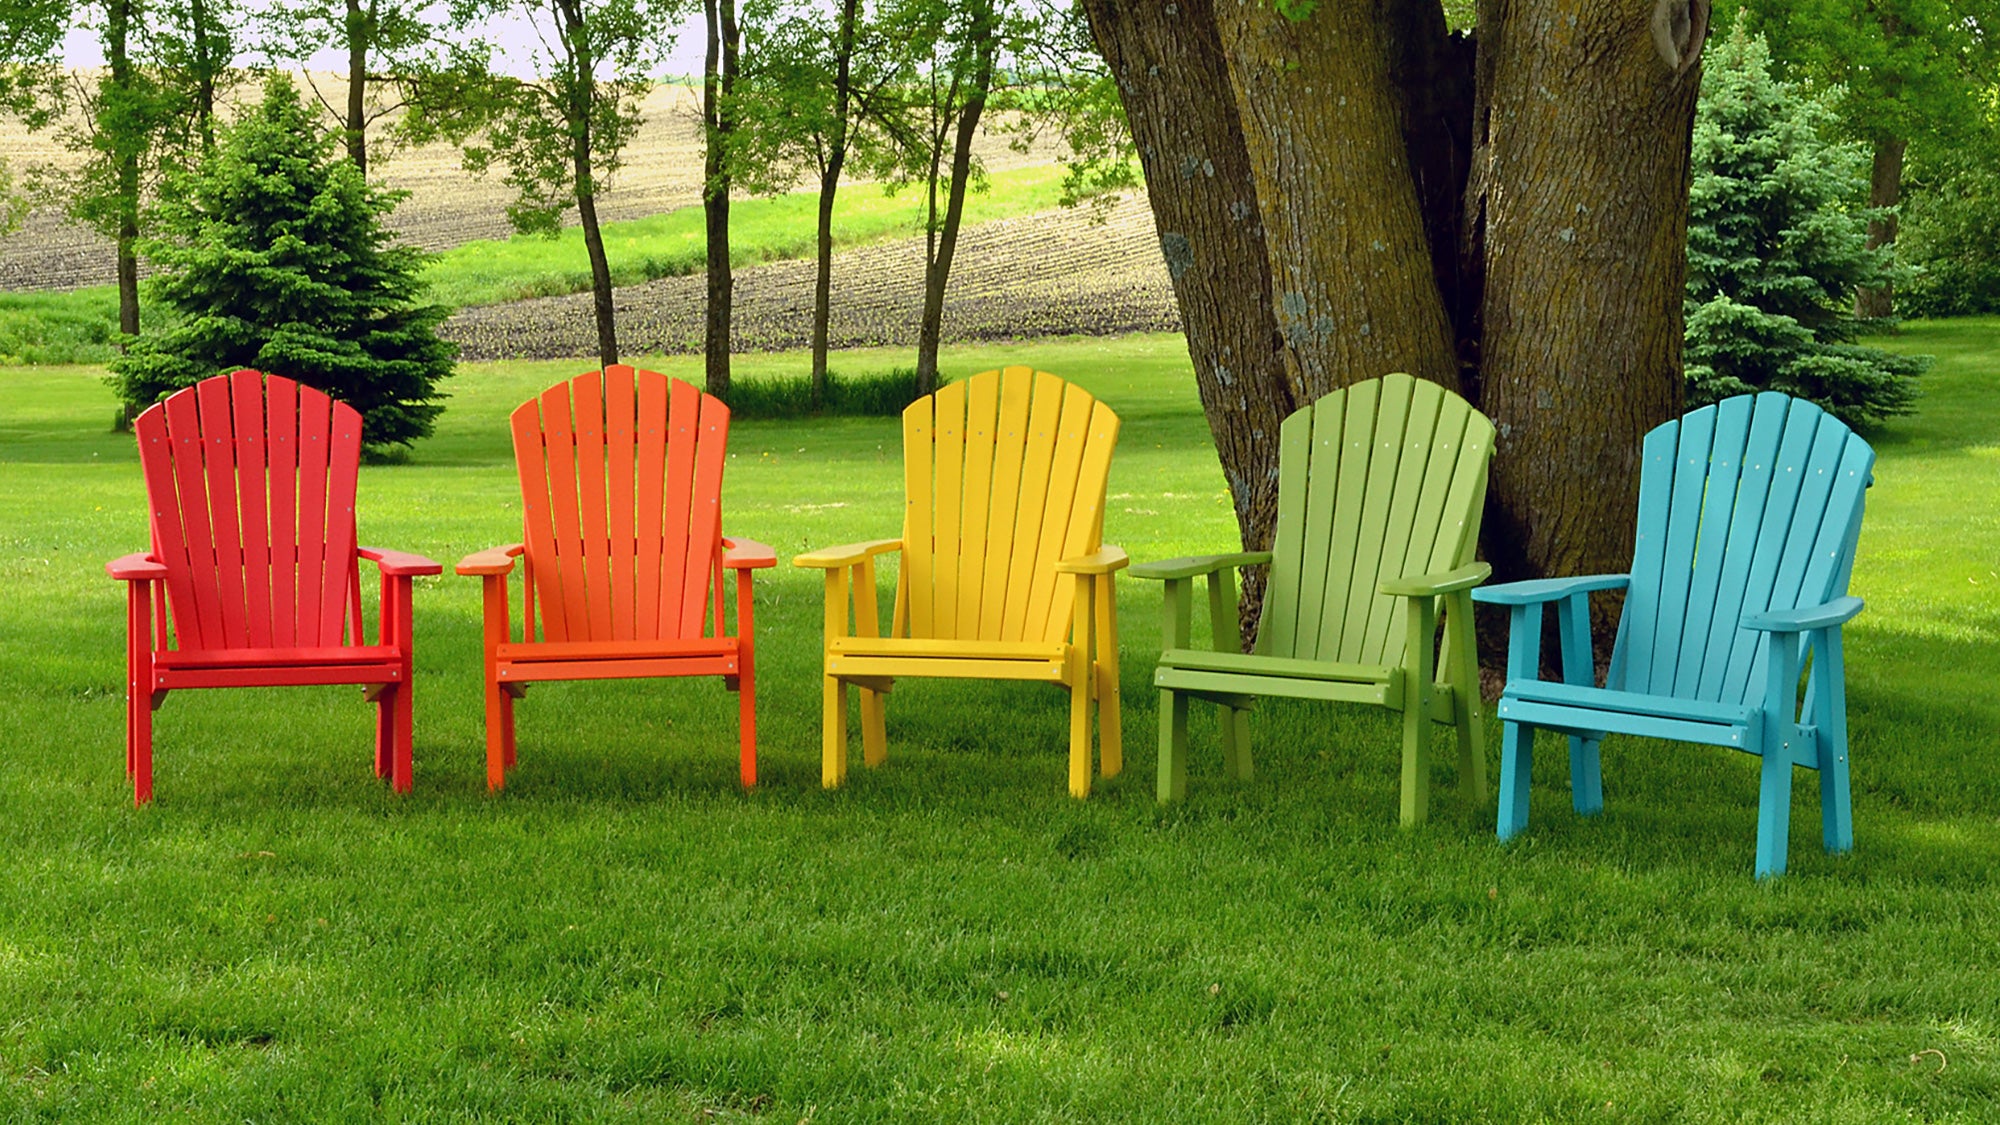 Adirondack chairs in a rainbow of colors